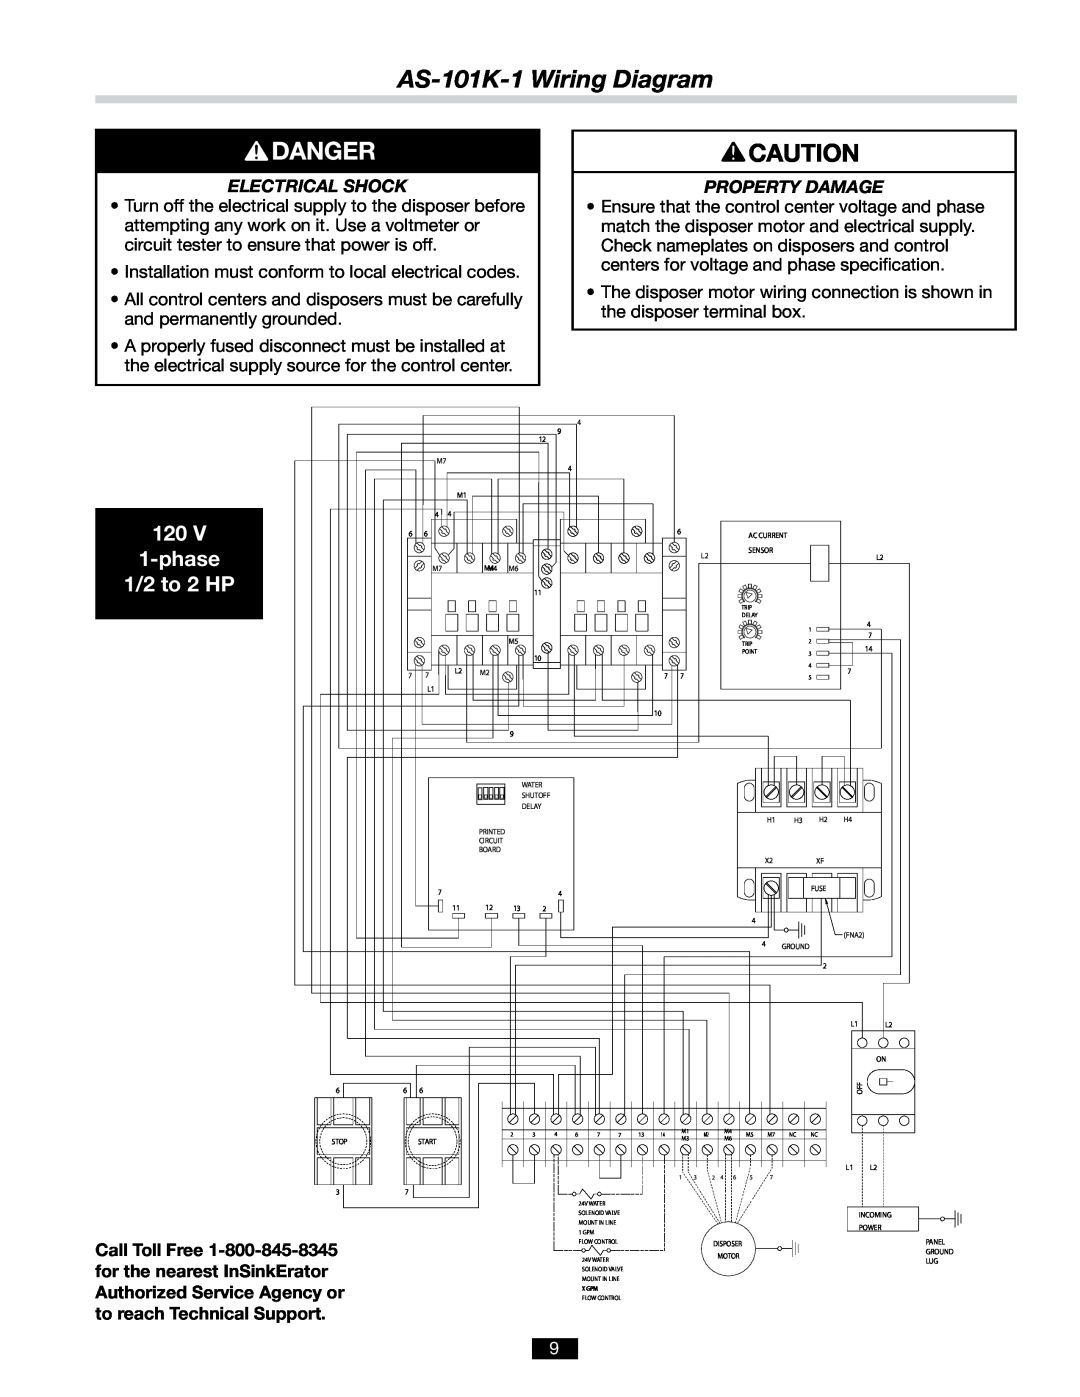 InSinkErator AS-101K-1 Wiring Diagram, phase, 1/2 to 2 HP, Electrical Shock, Property Damage, Call Toll Free 